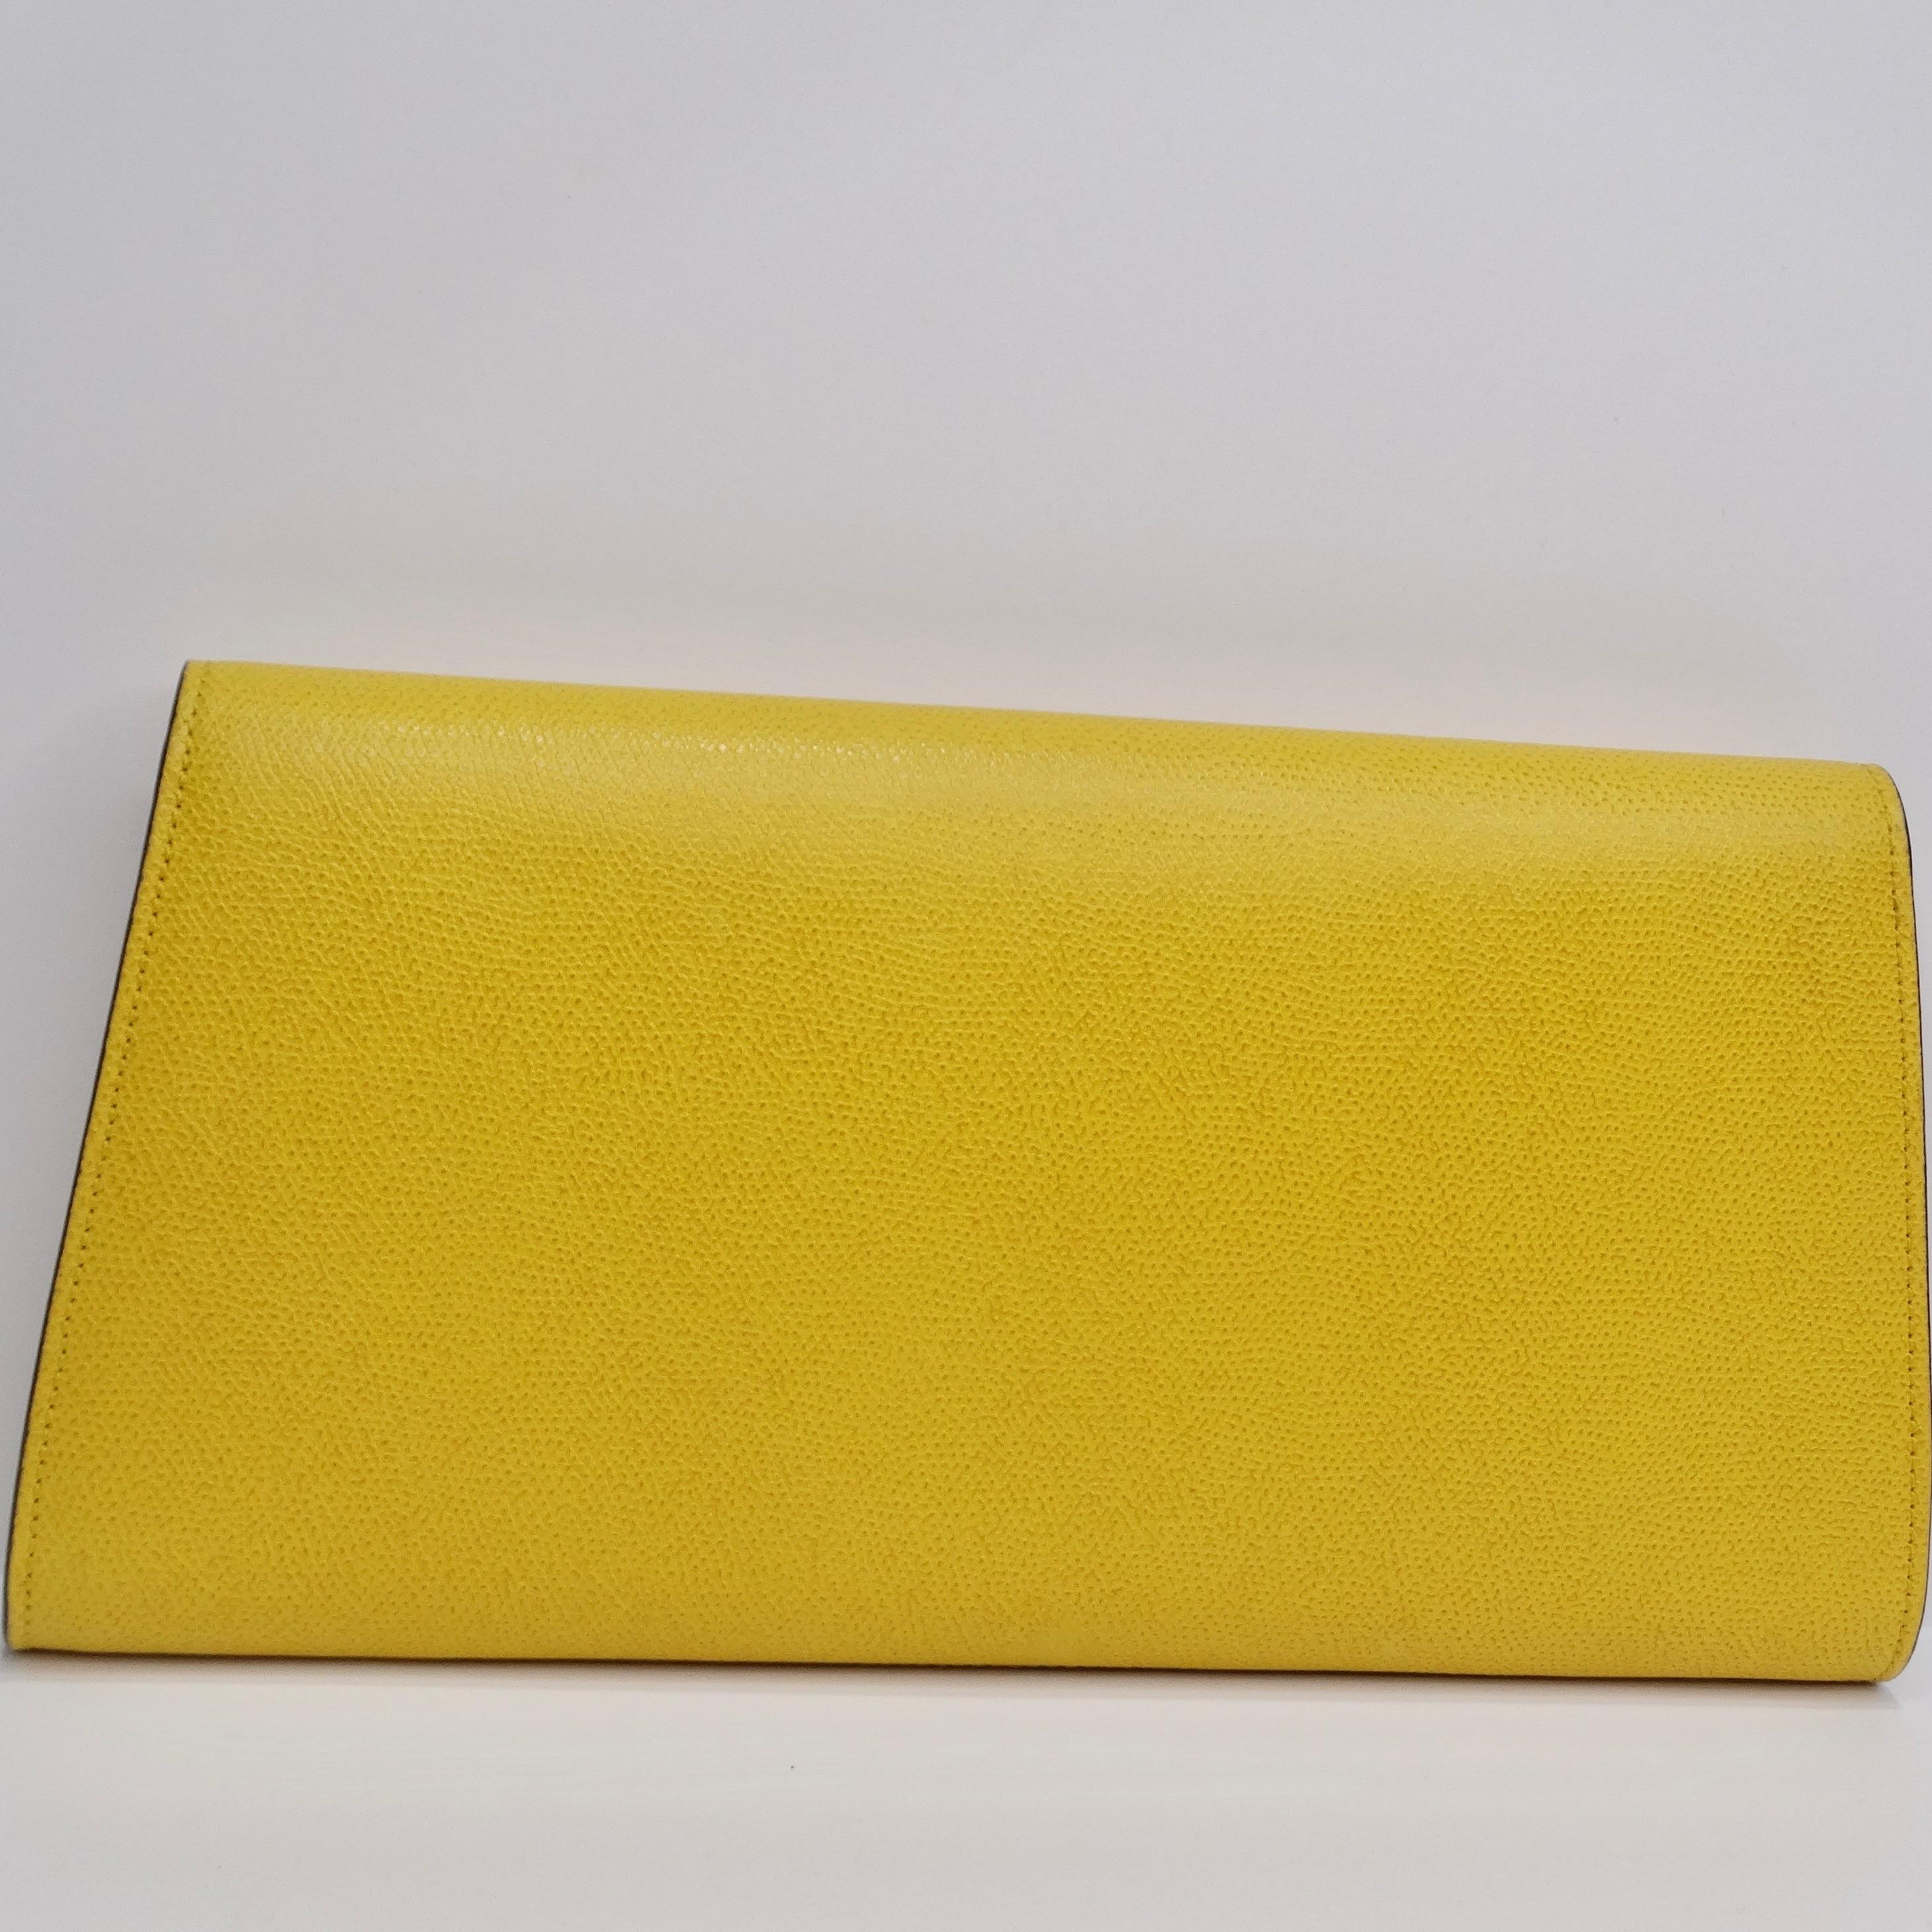 Valextra Yellow Leather Clutch In Excellent Condition For Sale In Scottsdale, AZ